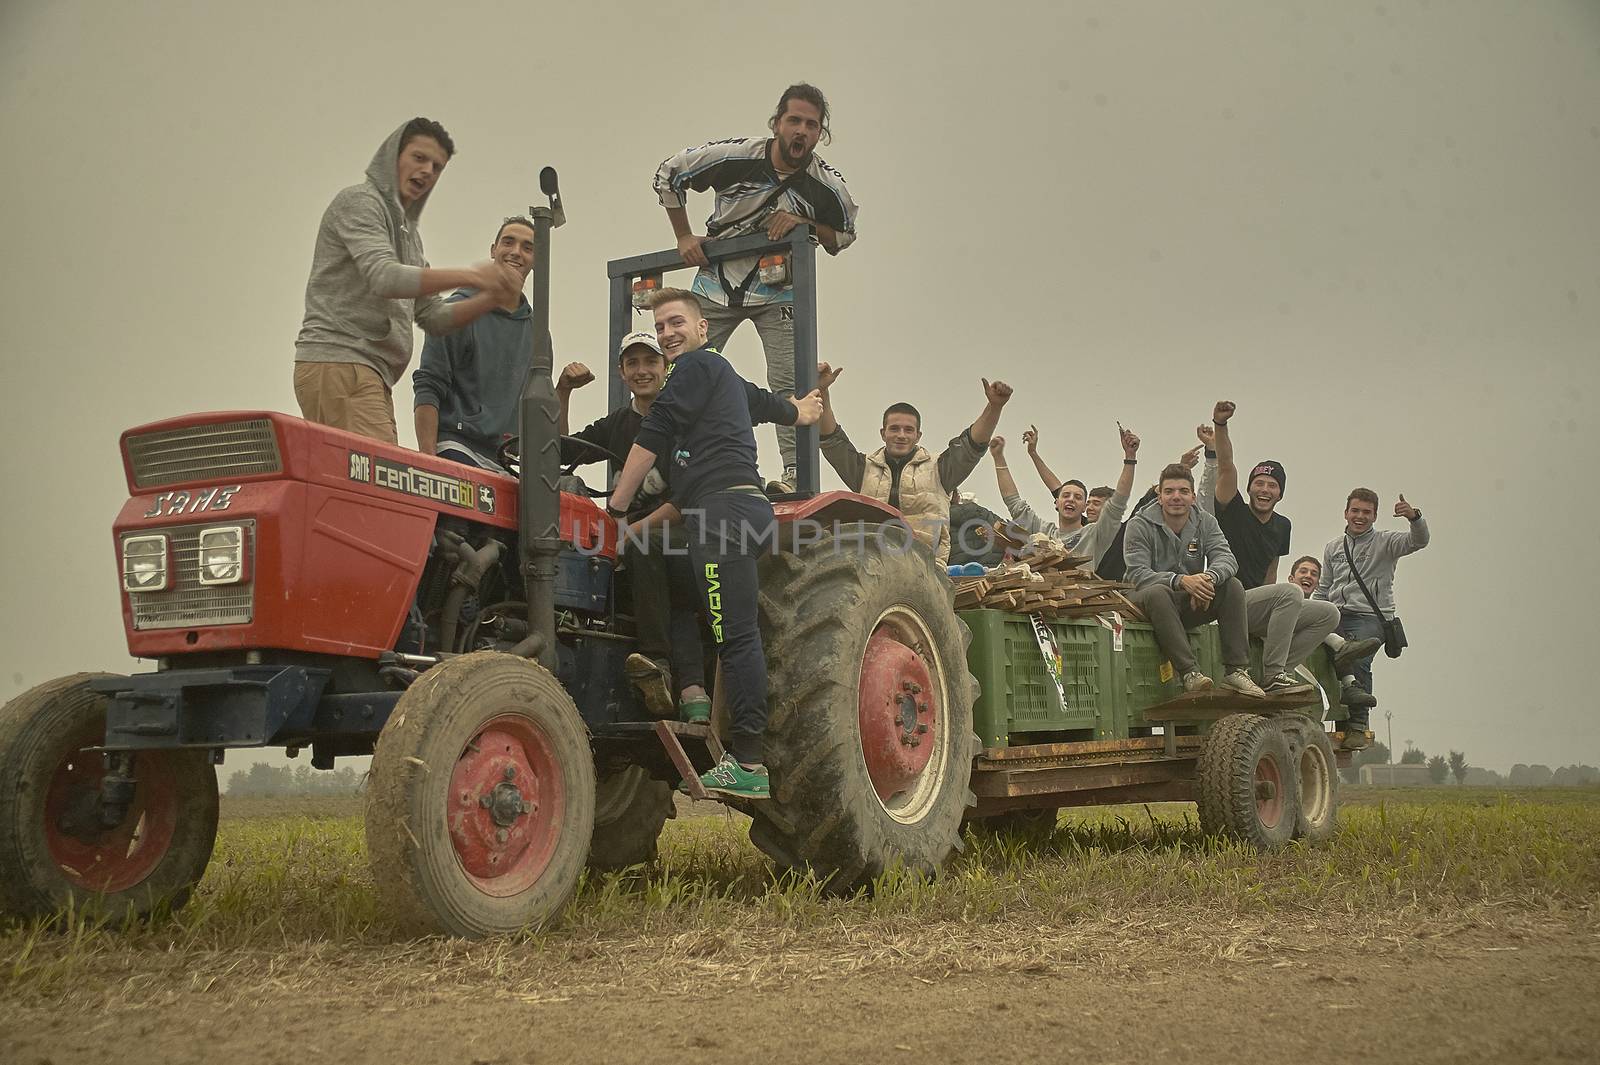 Farmers on the tractor by pippocarlot